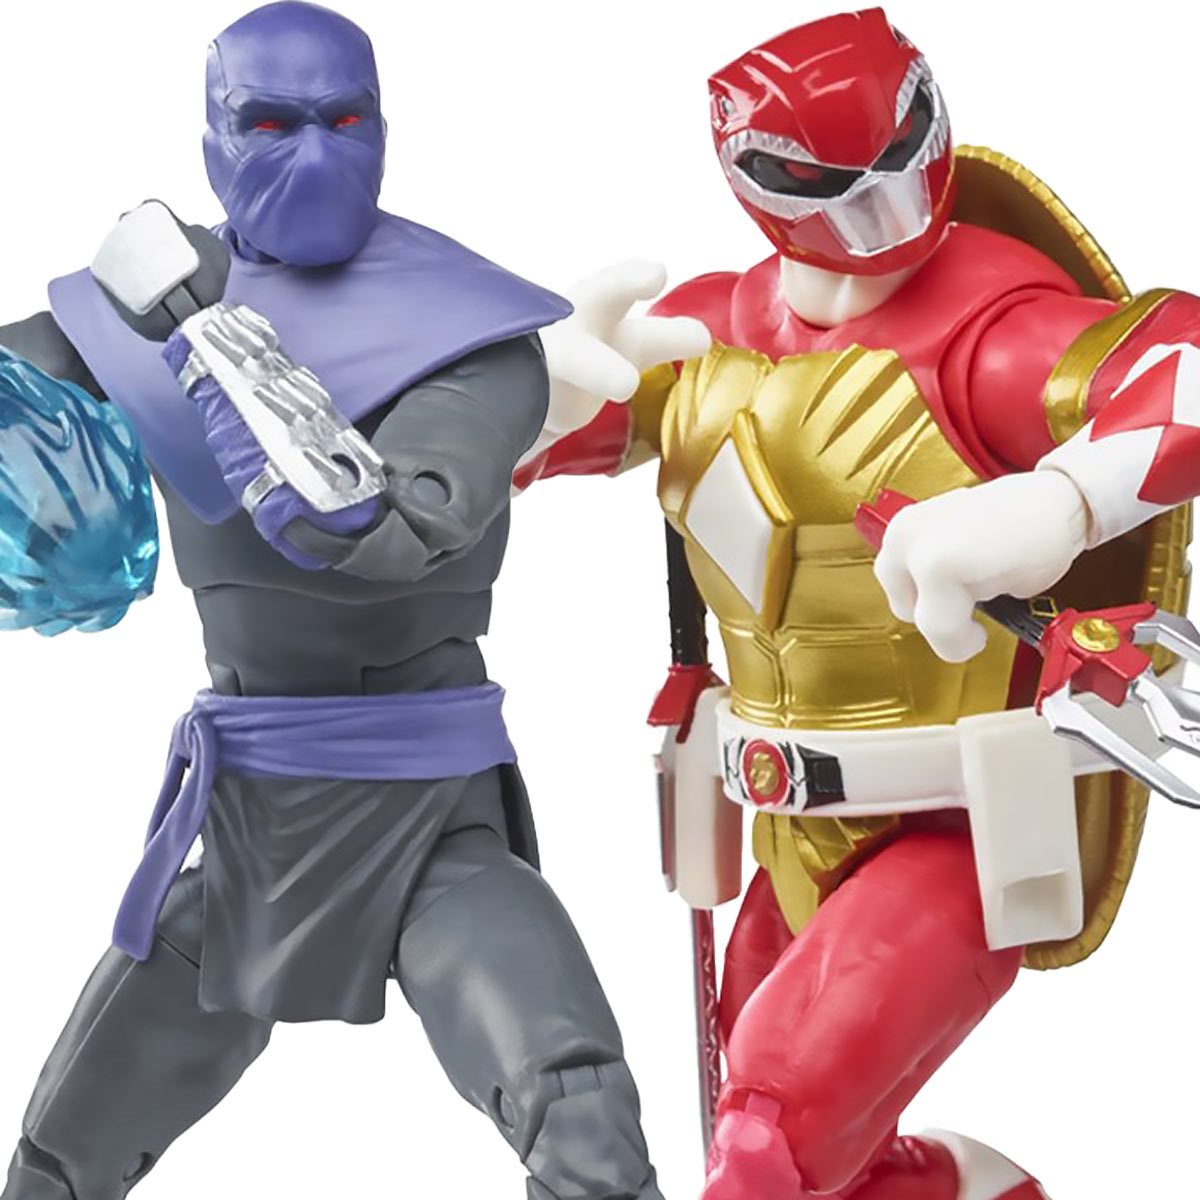 Power Rangers X Teenage Mutant Ninja Turtles: Lightning Collection - Foot Soldier Tommy and Raphael Red Action Figures